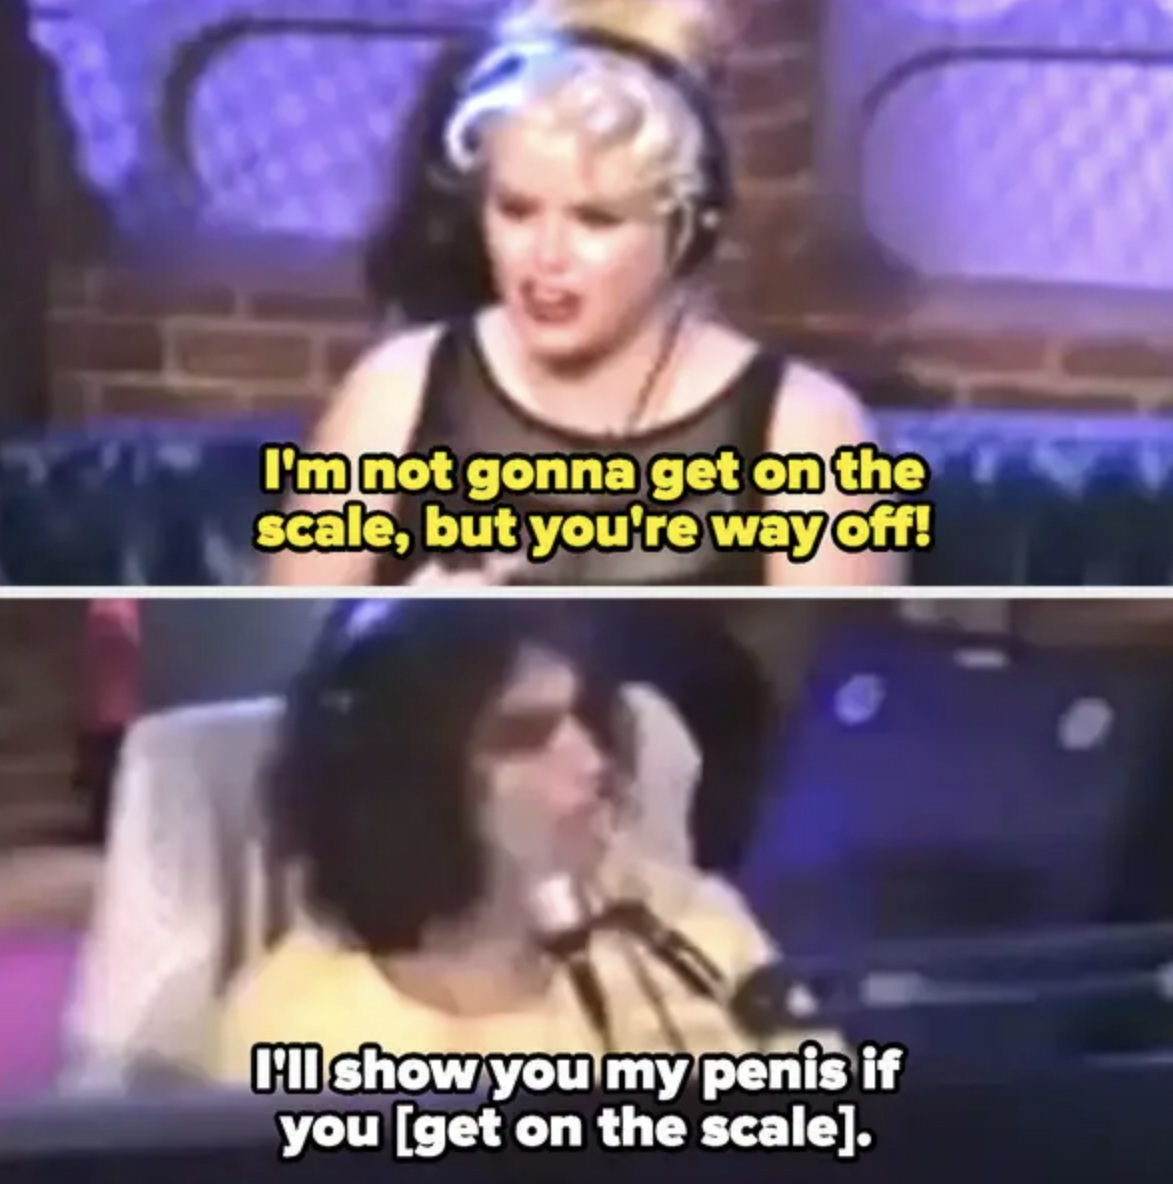 After Anna Nicole Smith says she won&#x27;t get on the scale, Howard says, &quot;I&#x27;ll show you my penis if you [get on the scale]&quot;